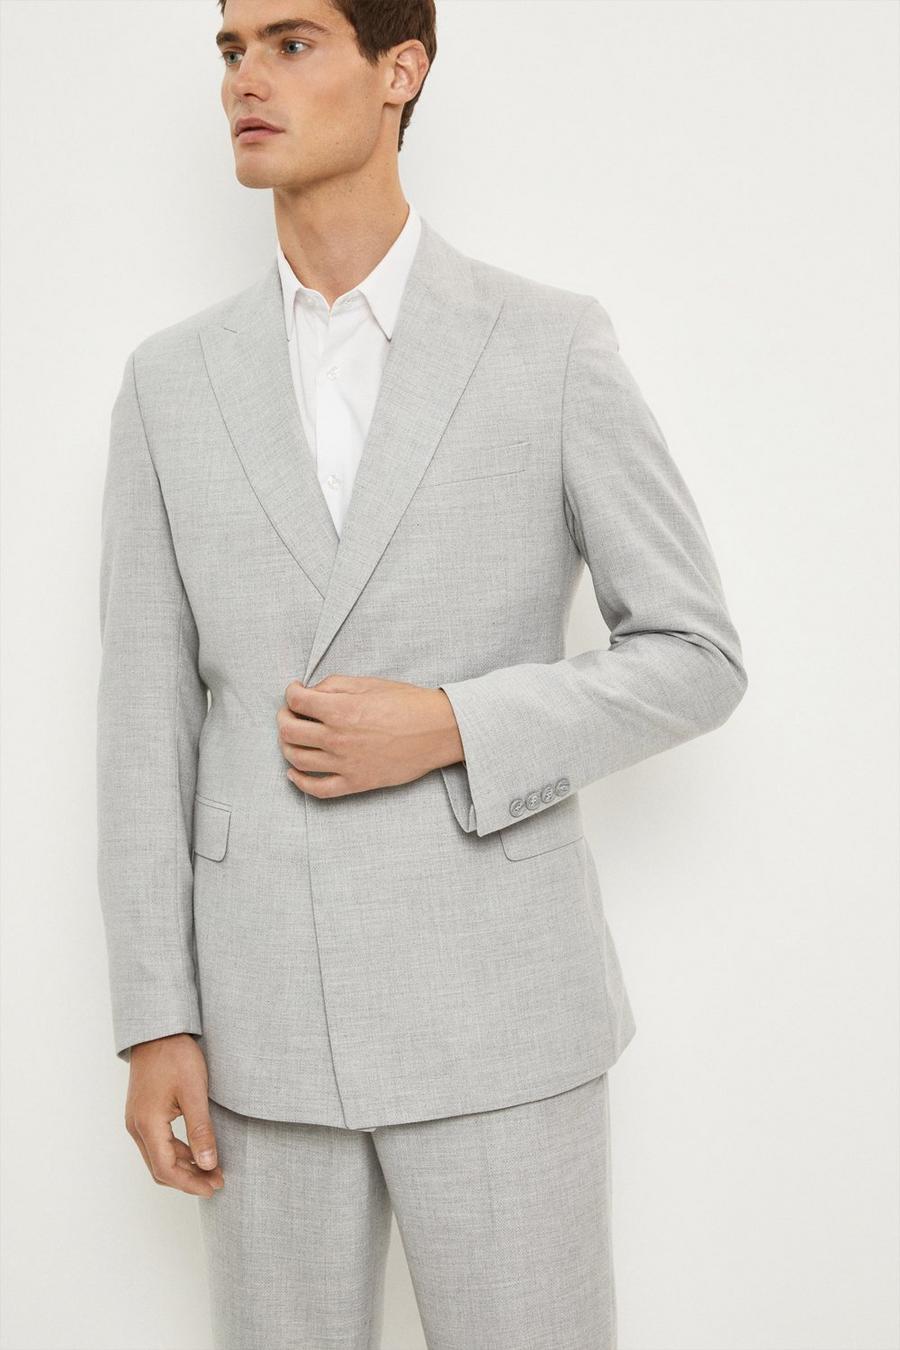 Relaxed Fit Grey Textured Three-Piece Suit